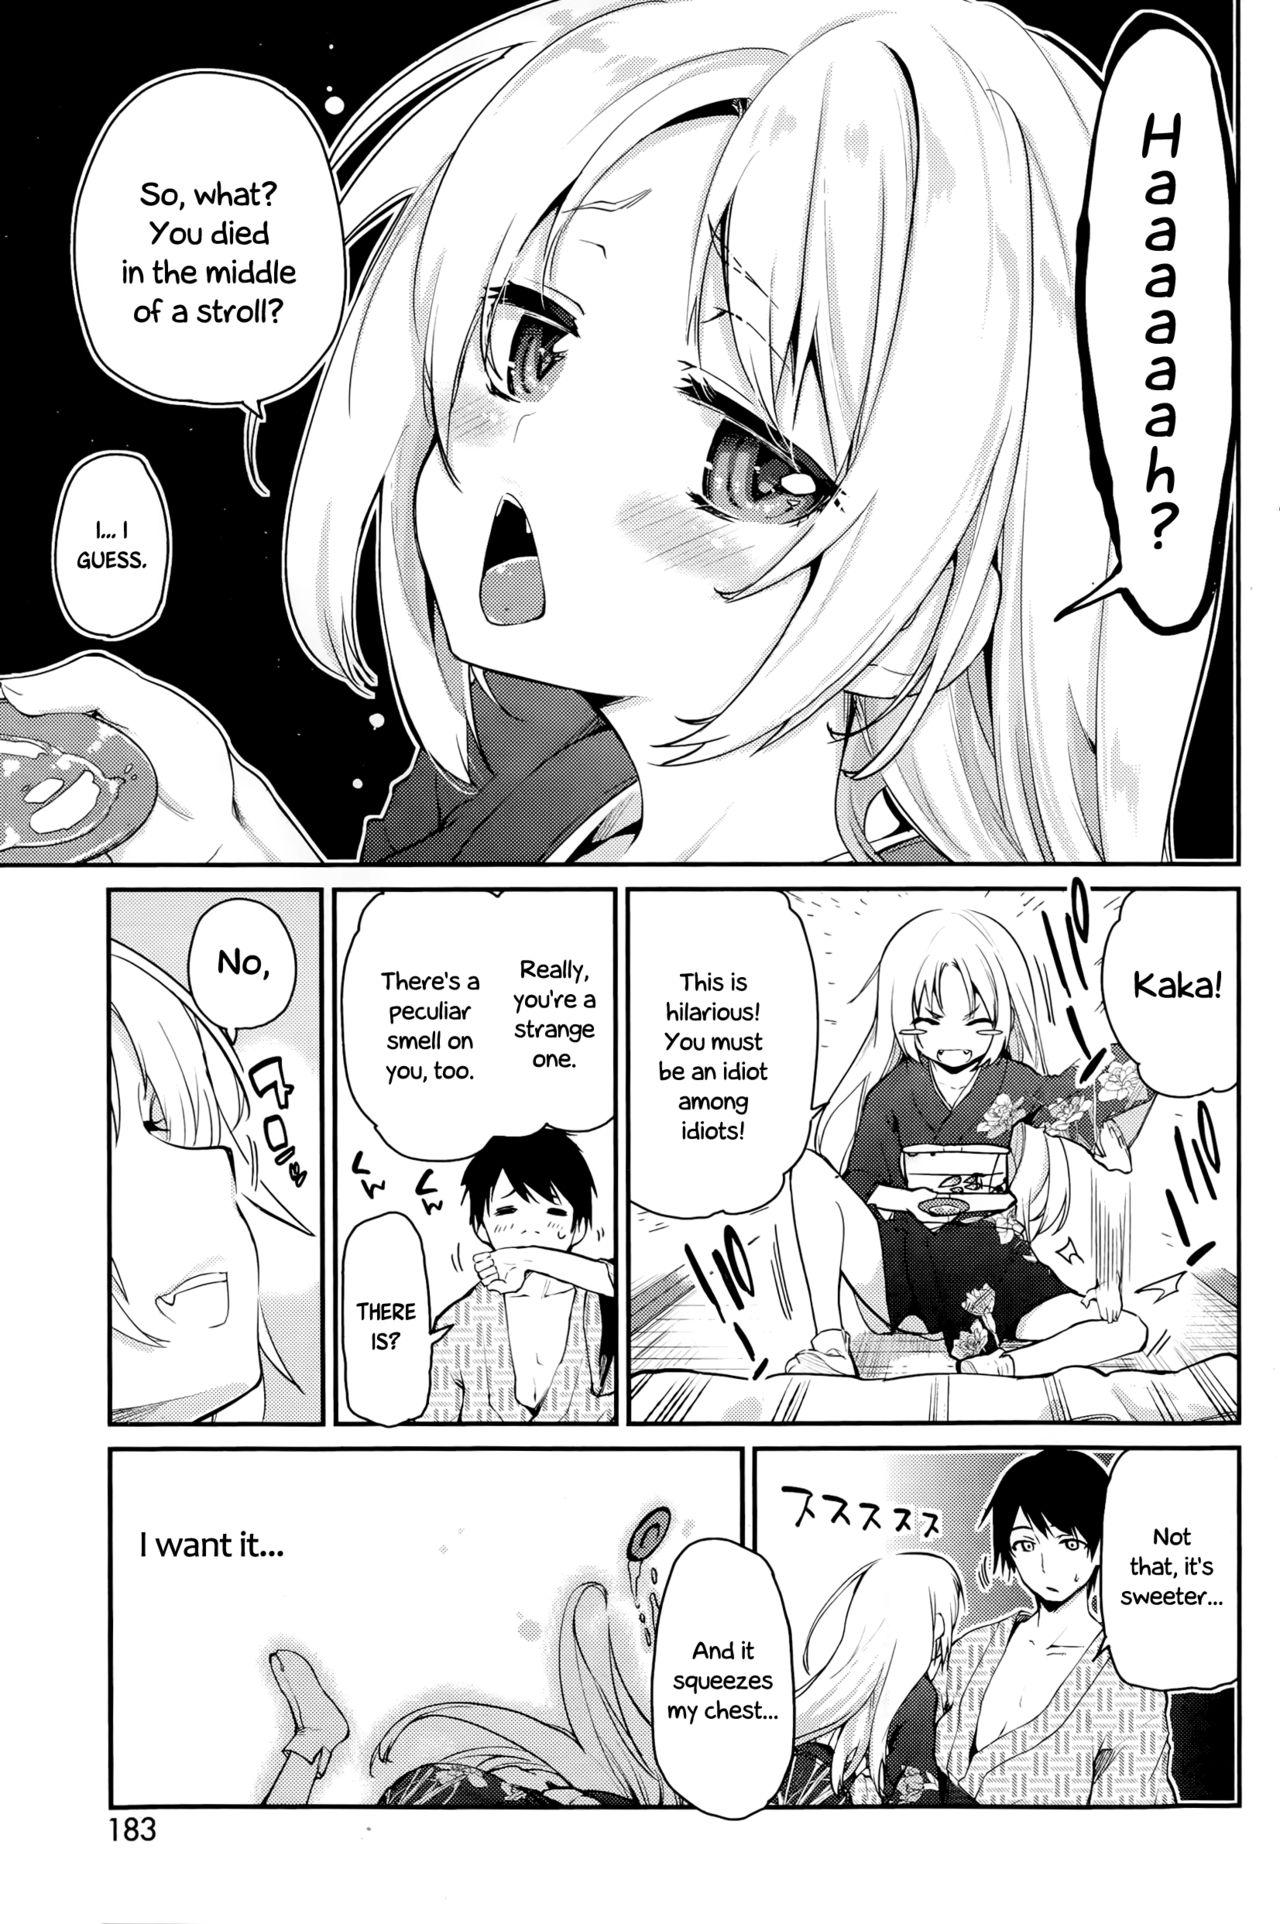 Celebrity Porn Ayakashi-kan e Youkoso! Ch. 1 Cunnilingus - Page 5